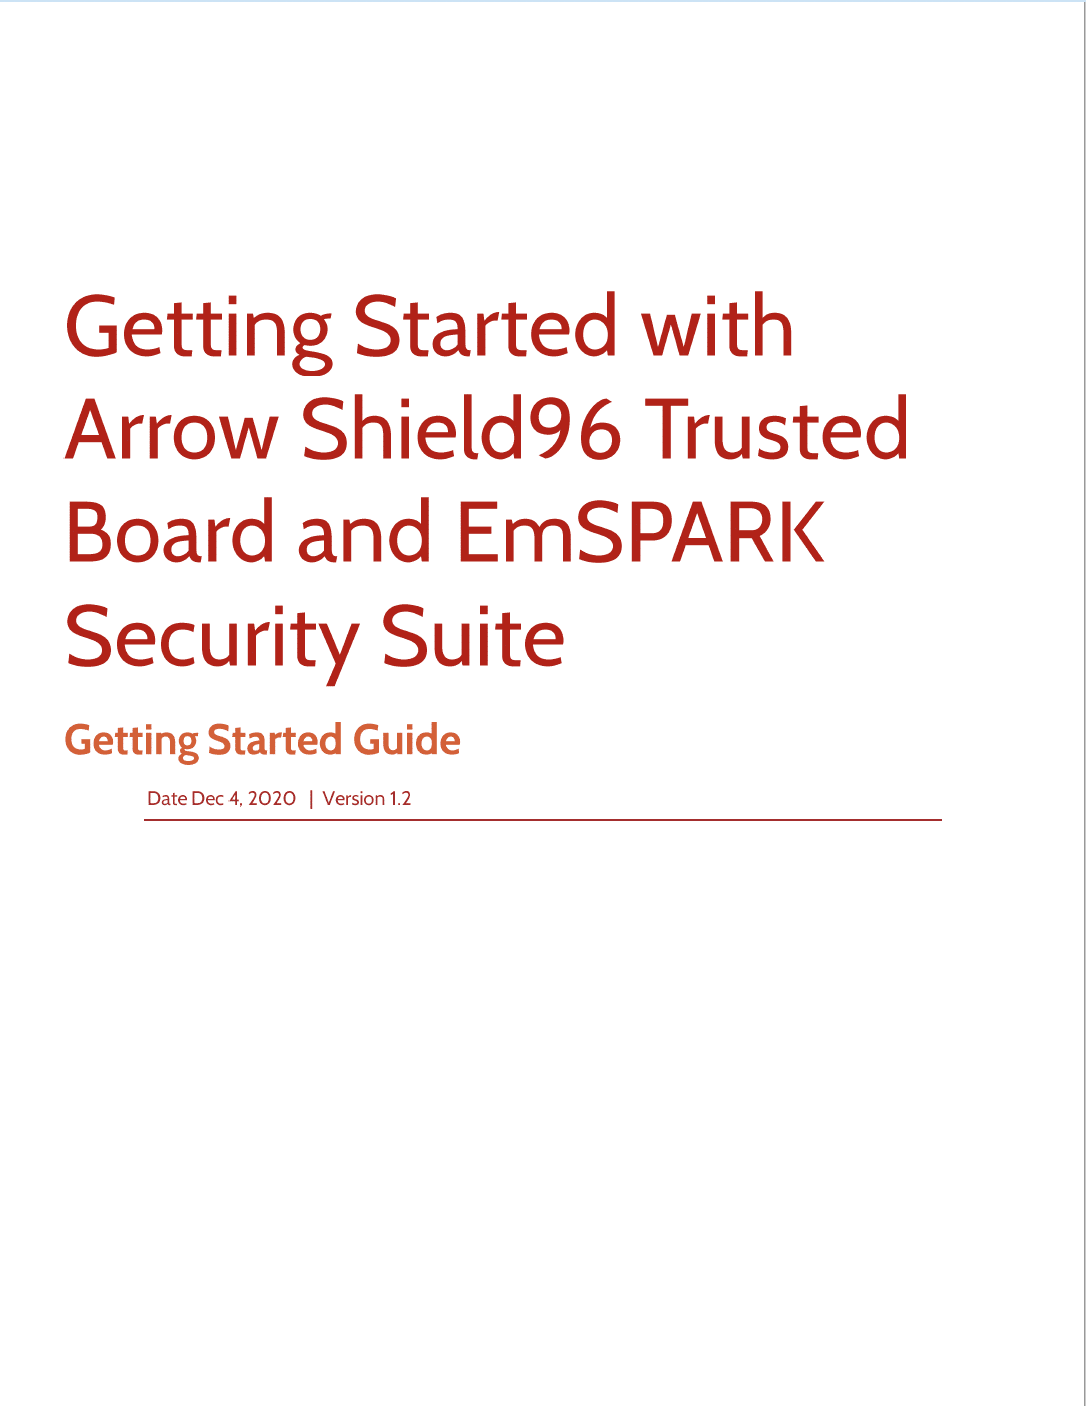 Getting Started with Arrow Shield96 Trusted Board and EmSPARK™ Security Suite  version 1.2